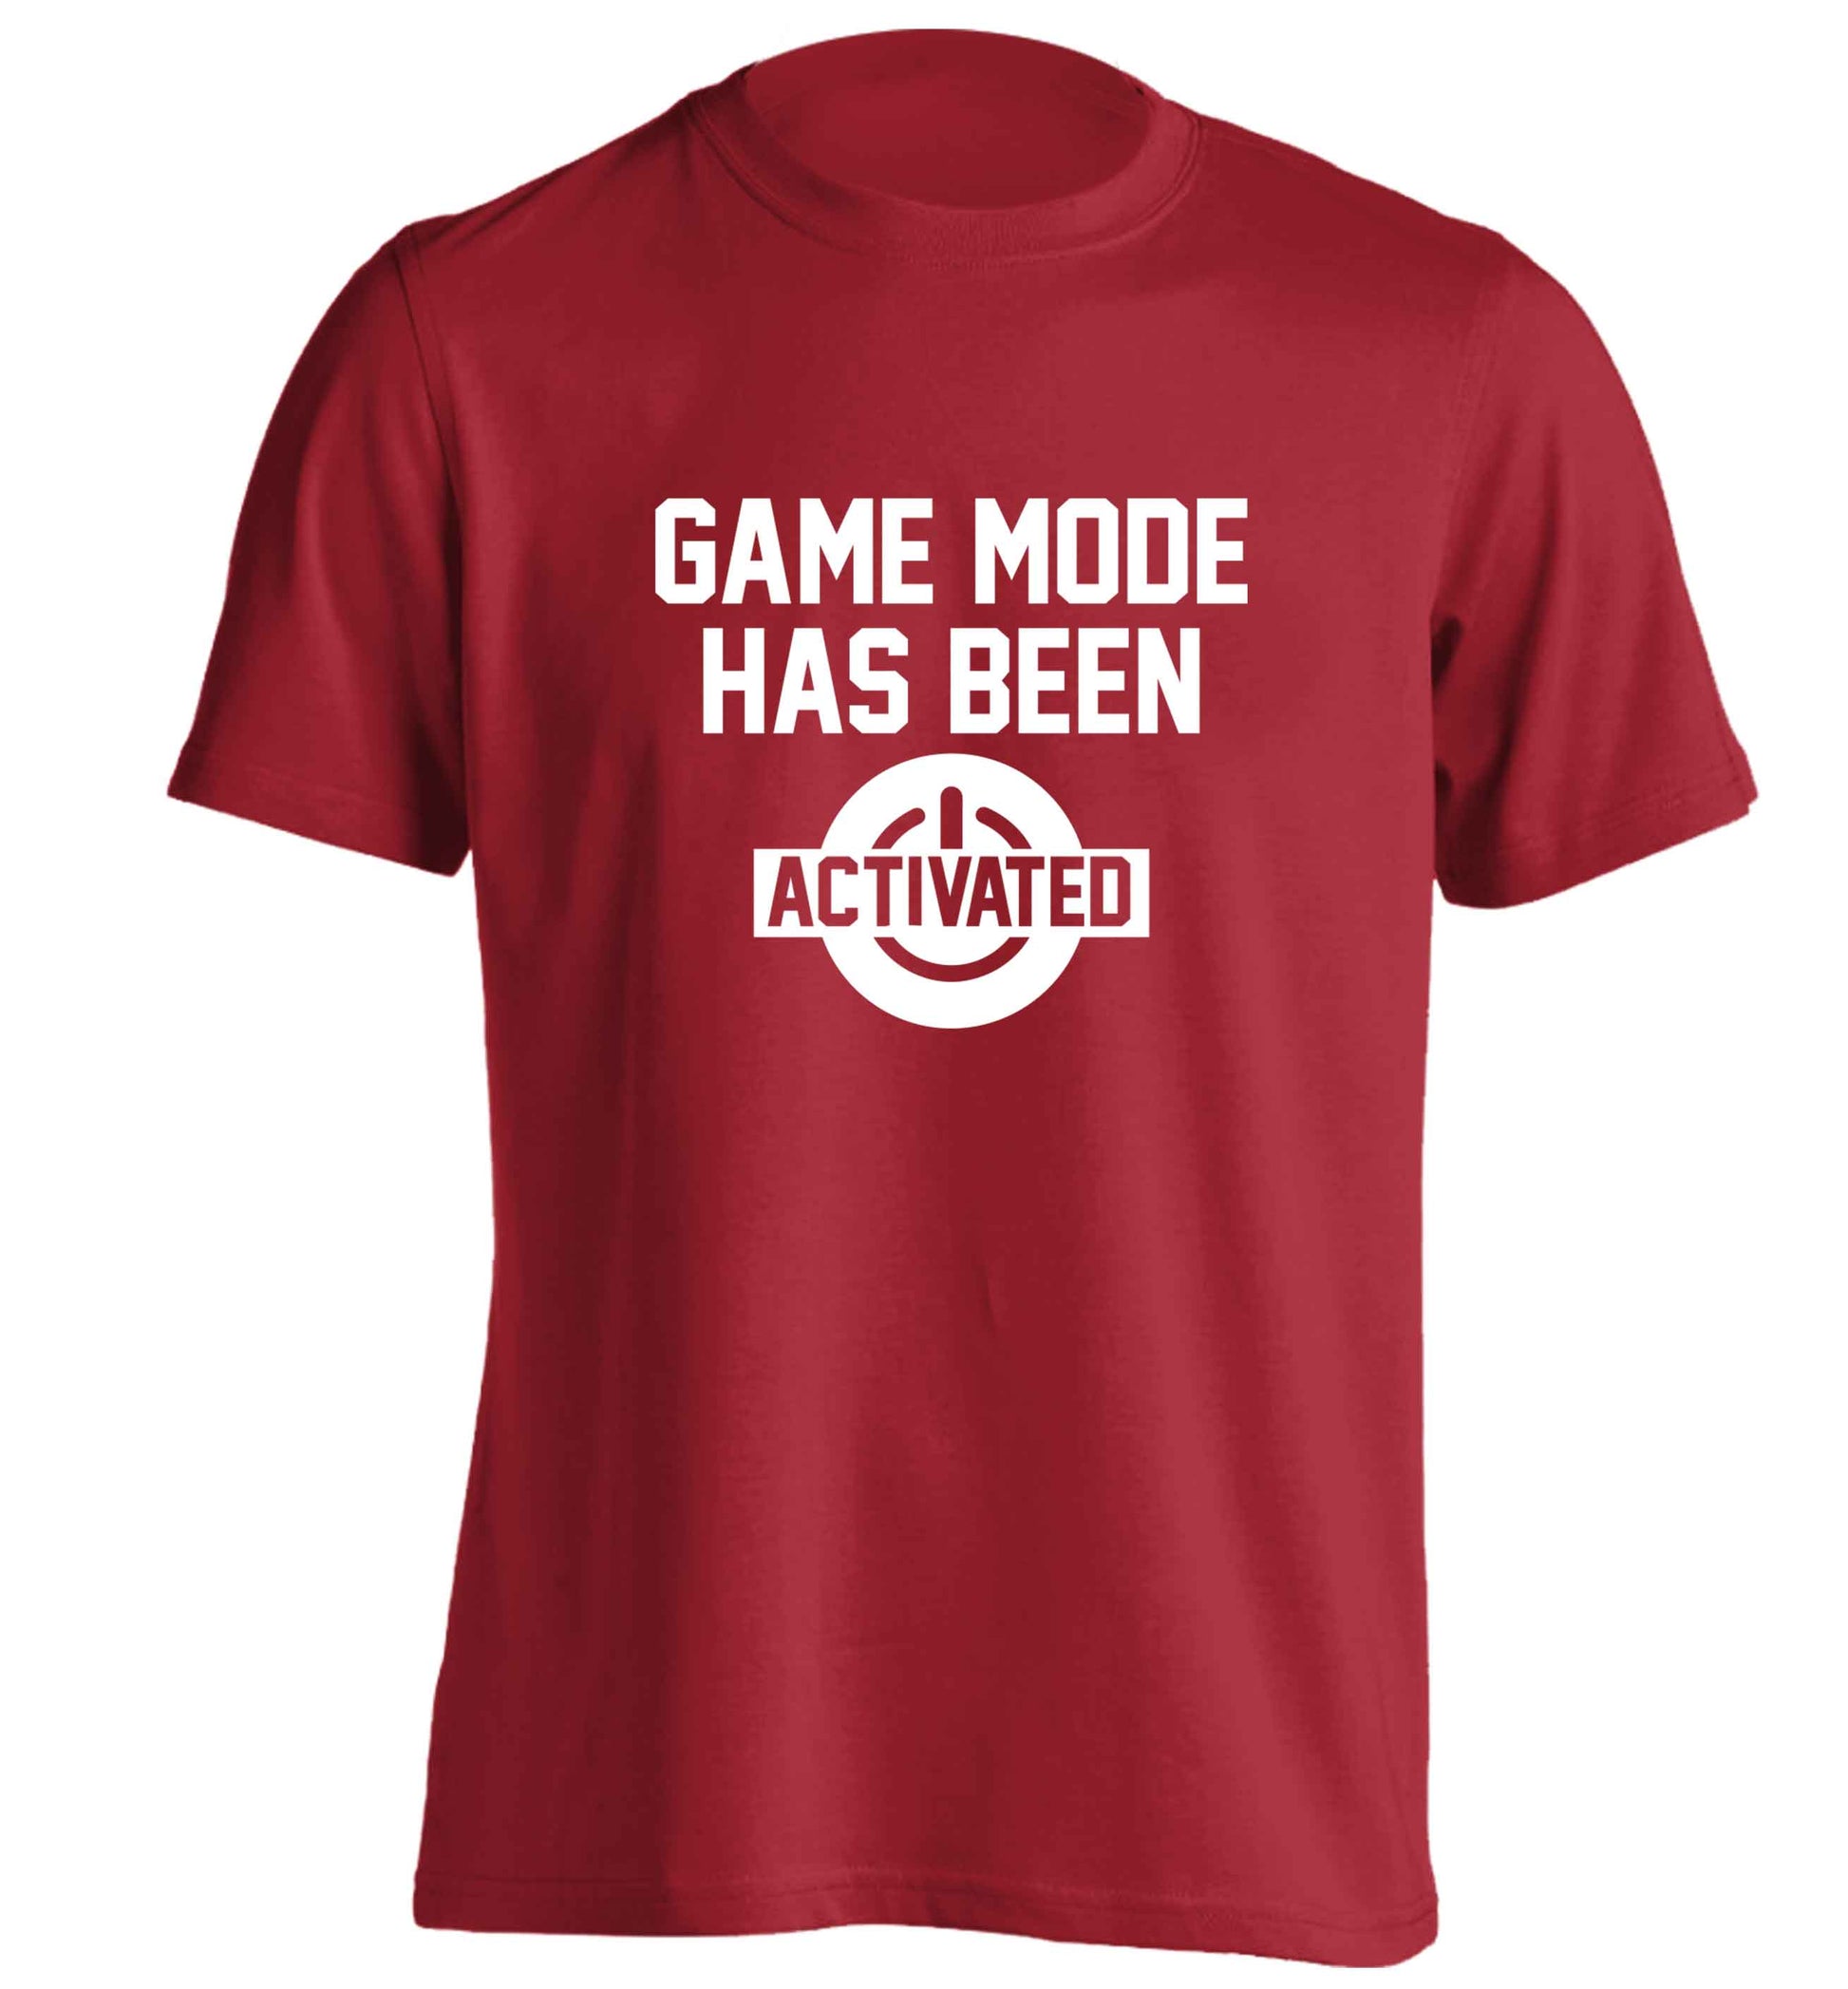 Game mode has been activated adults unisex red Tshirt 2XL